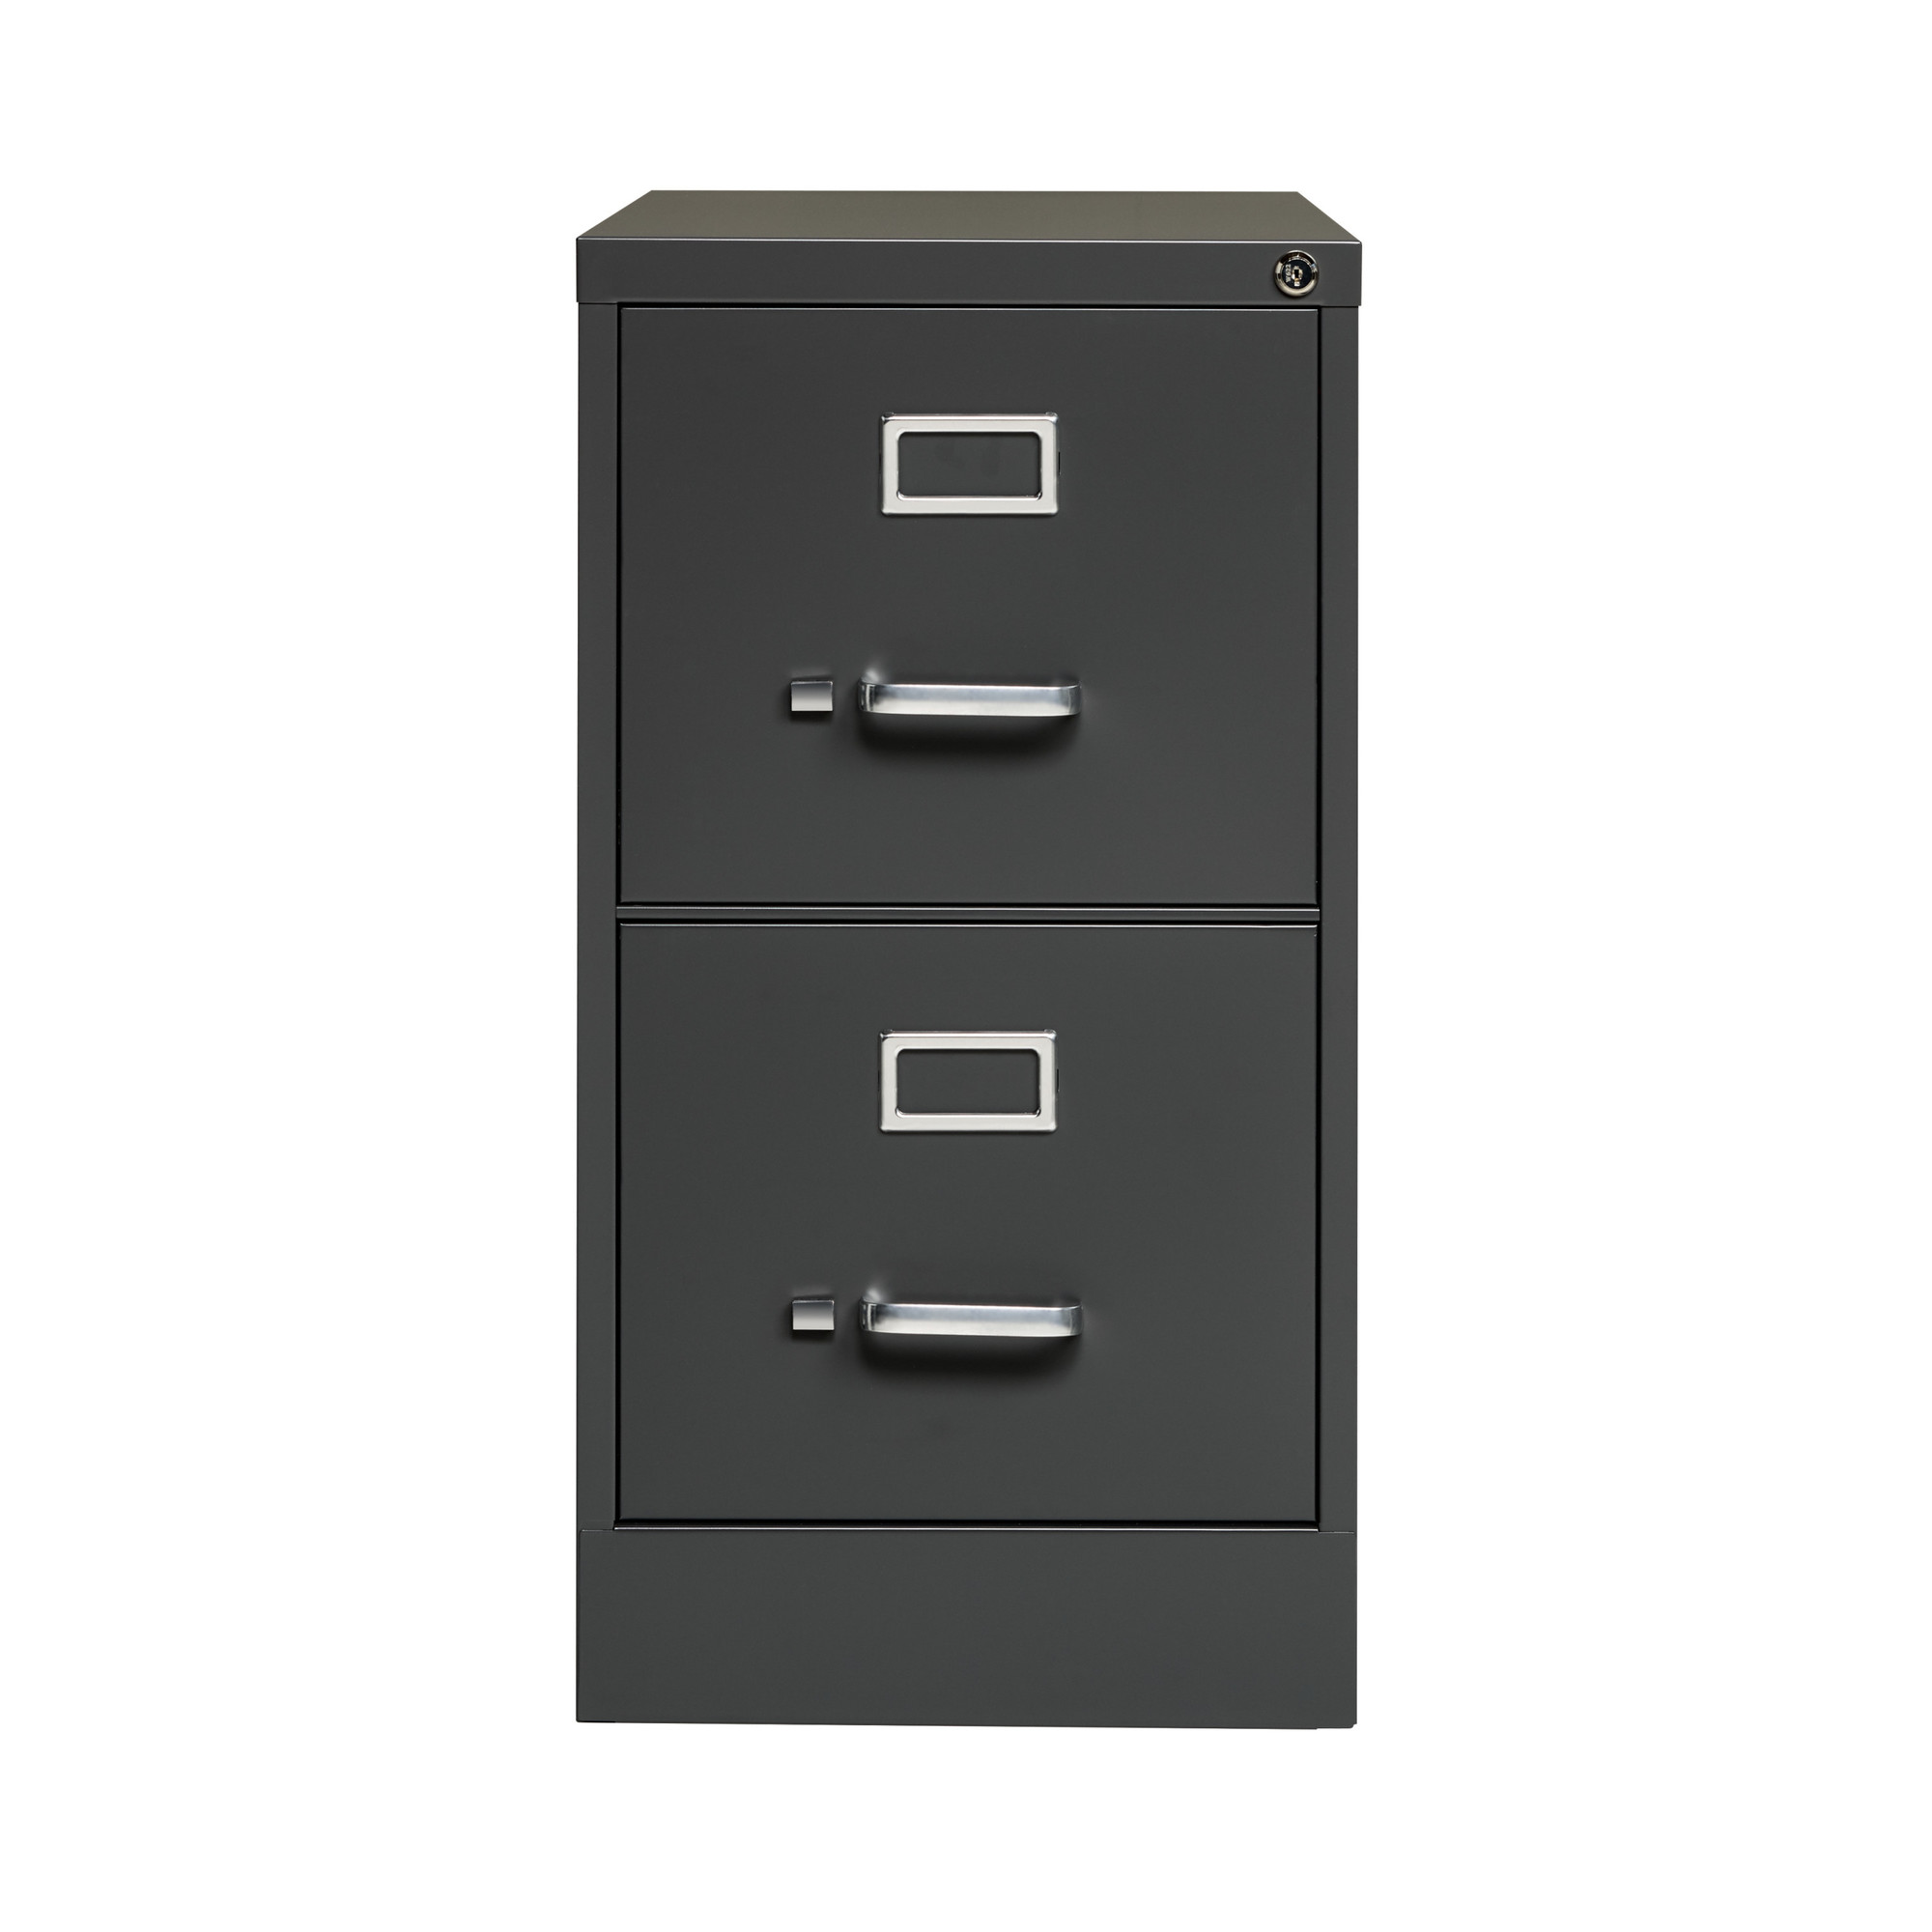 Hirsh Industries, 2 Drawer Letter W File Cabinet, Commerical Grade, Width 15 in, Depth 26.5 in, Height 28.375 in, Model 24065